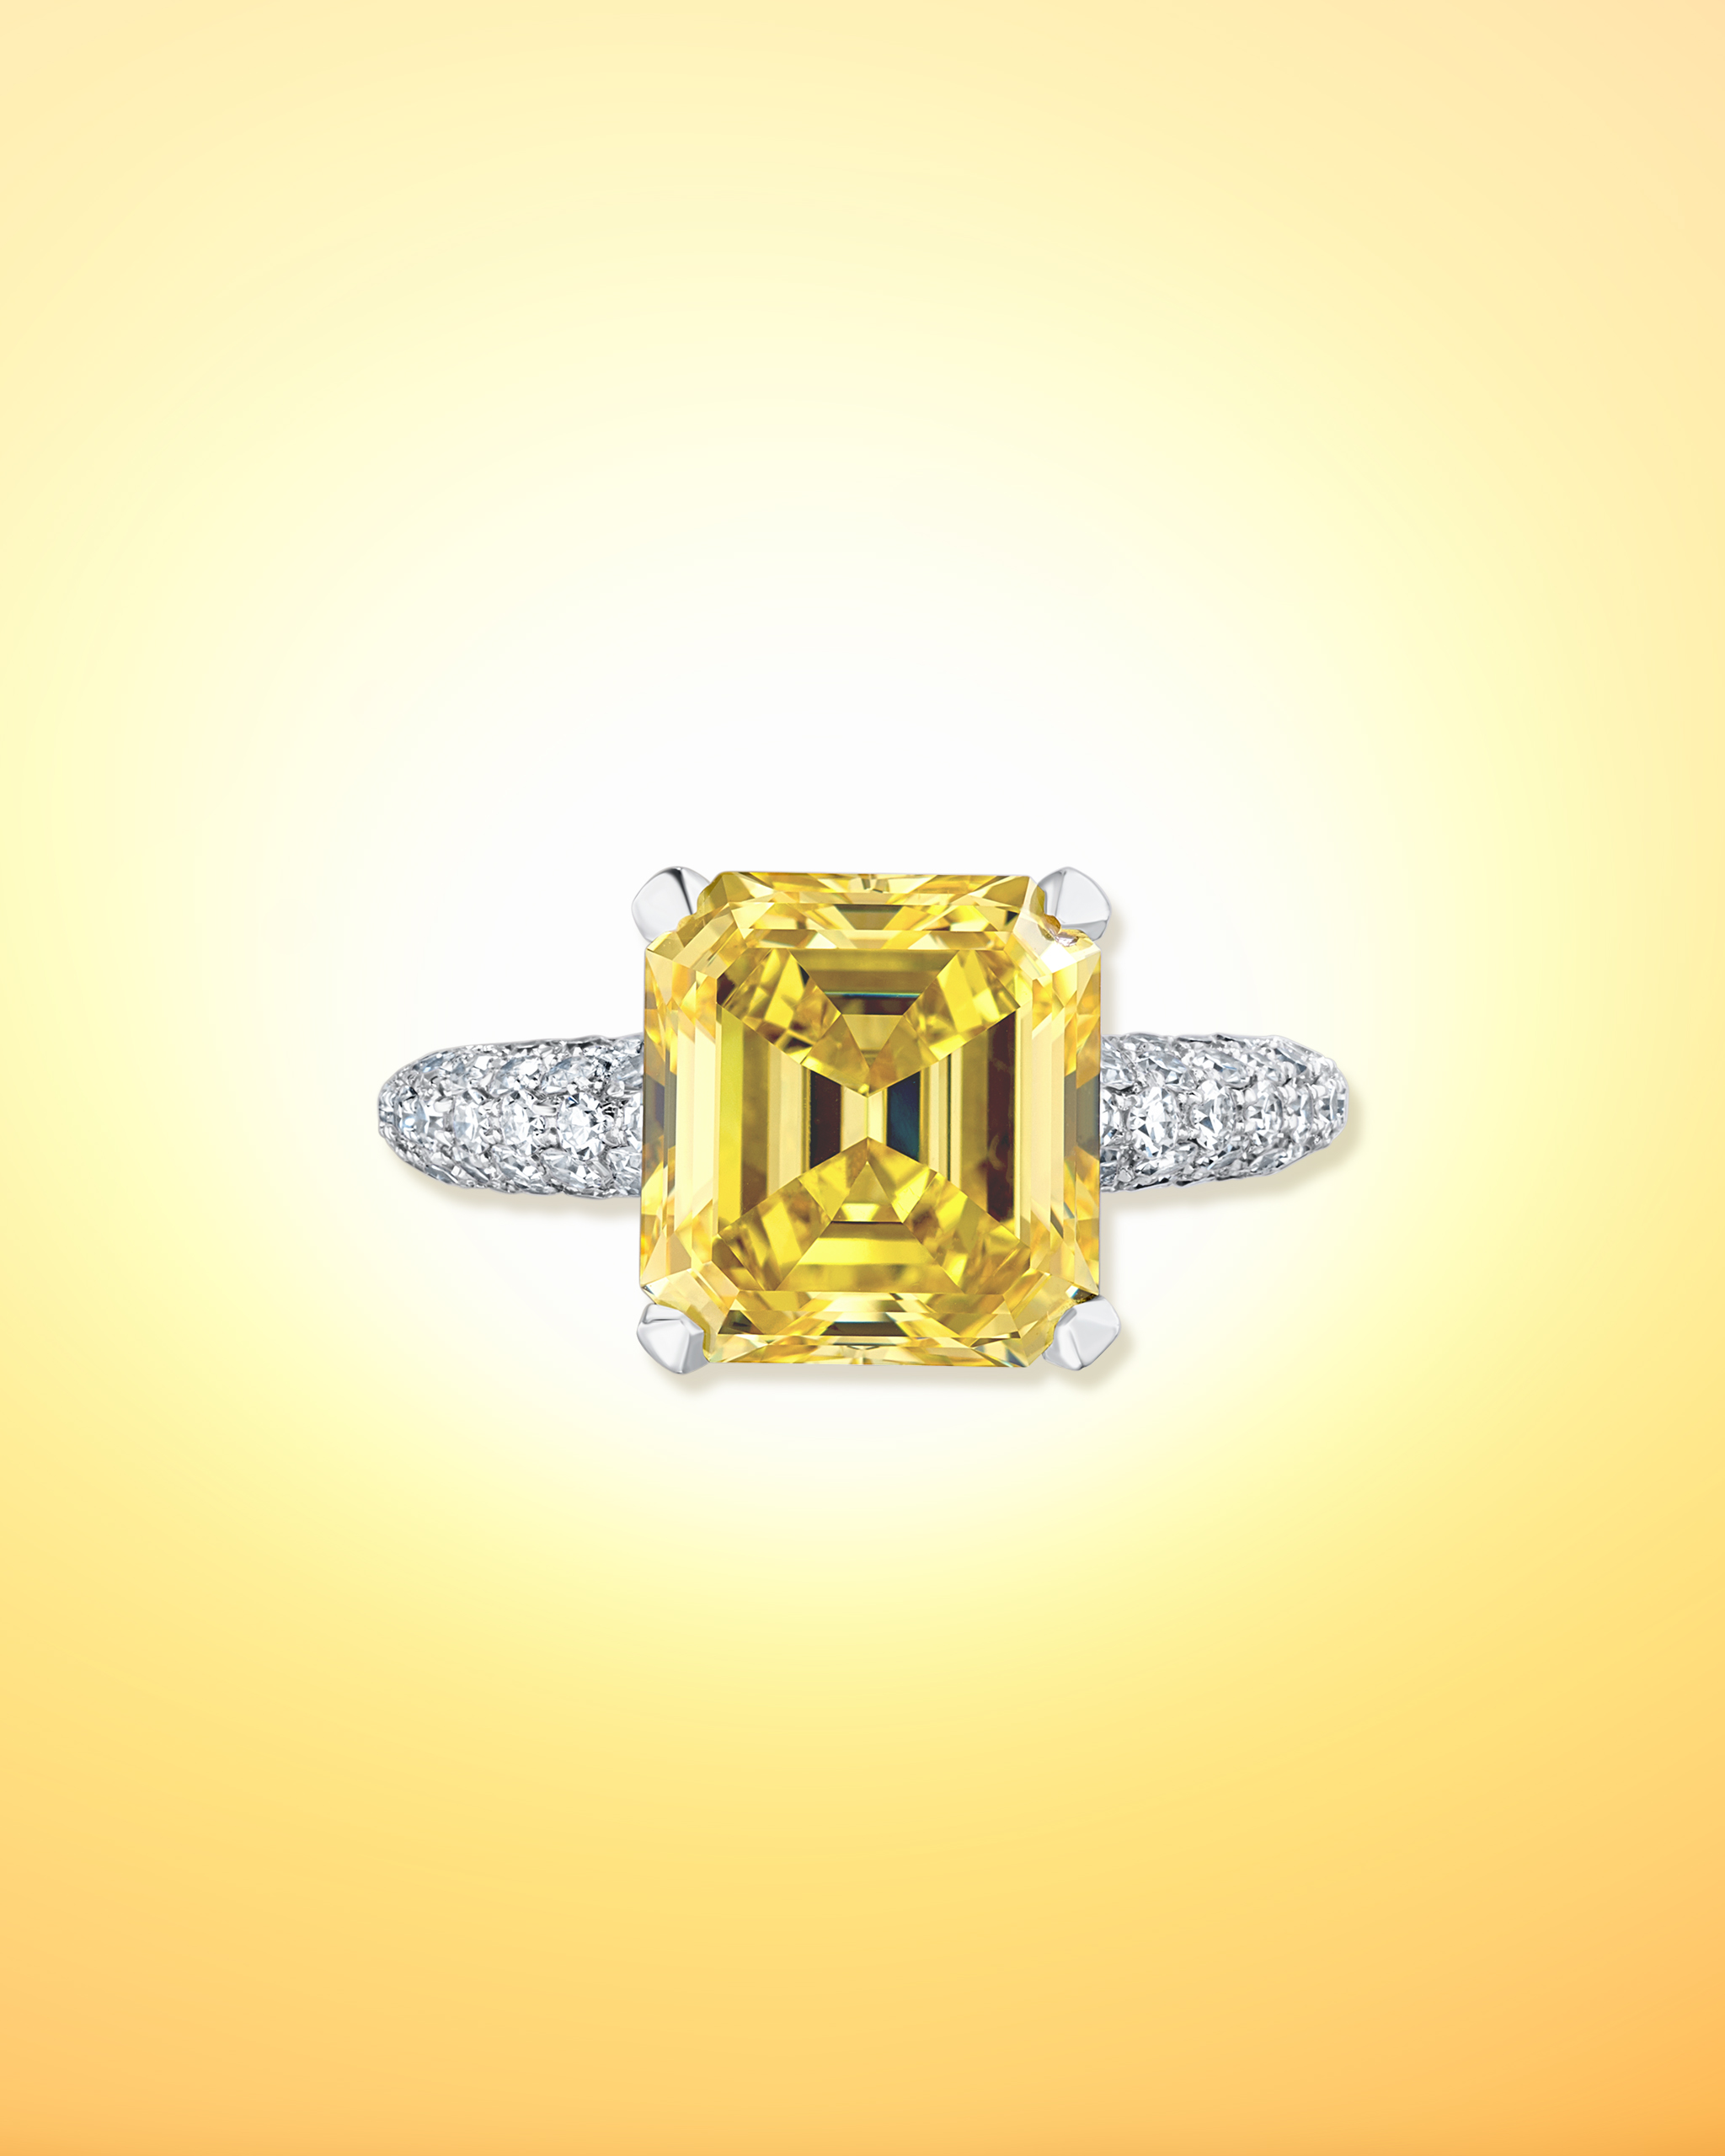 Squared, emerald cut yellow diamond ring on a white diamond encrusted band from David Morris